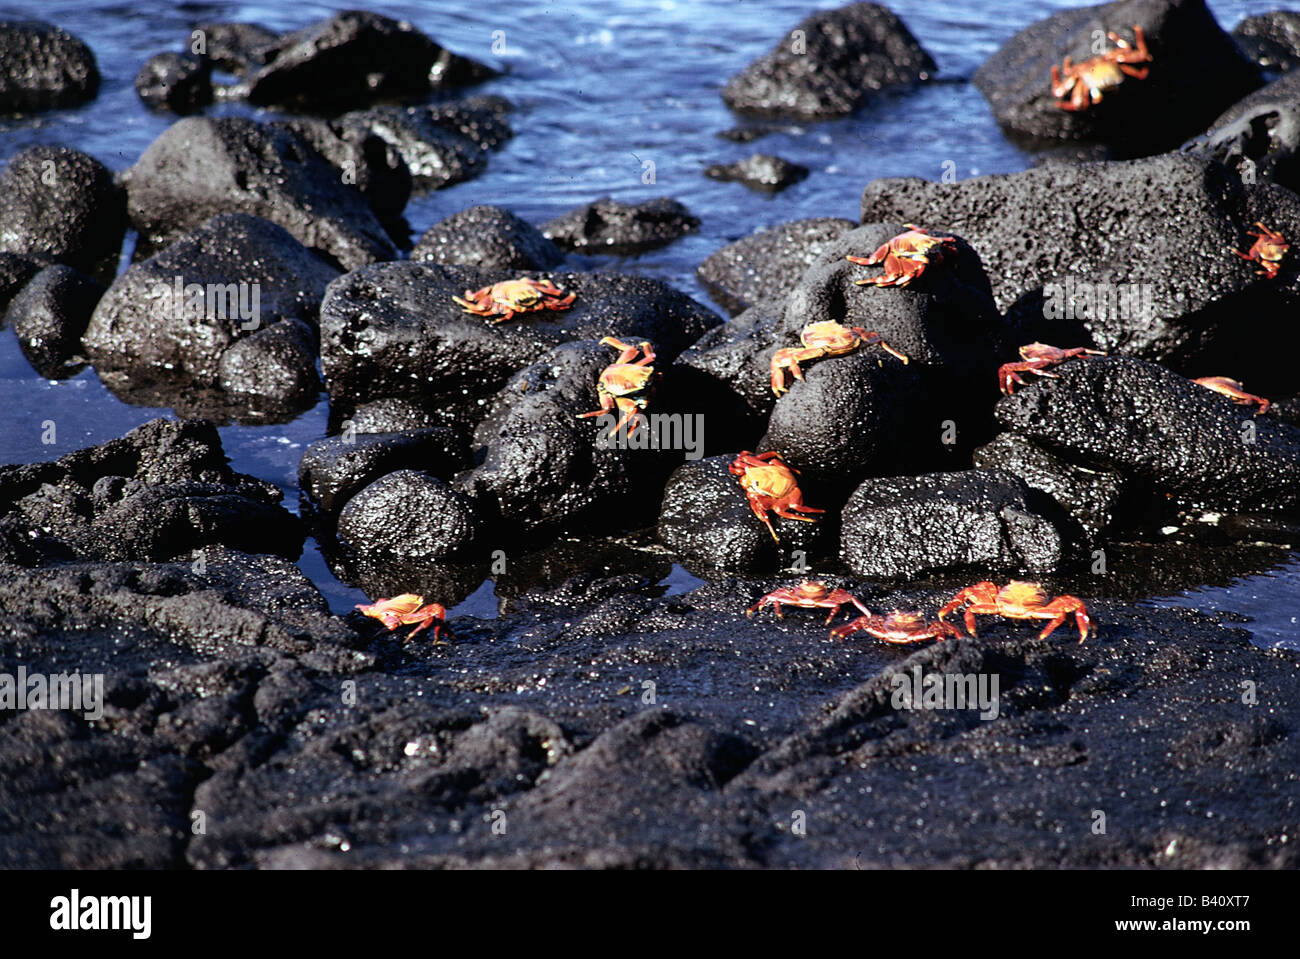 zoology / animals, crustaceans, Red rock crab, (Grapsus grapsus), several crabs sitting on rock, distribution: Mosquera and Gala Stock Photo